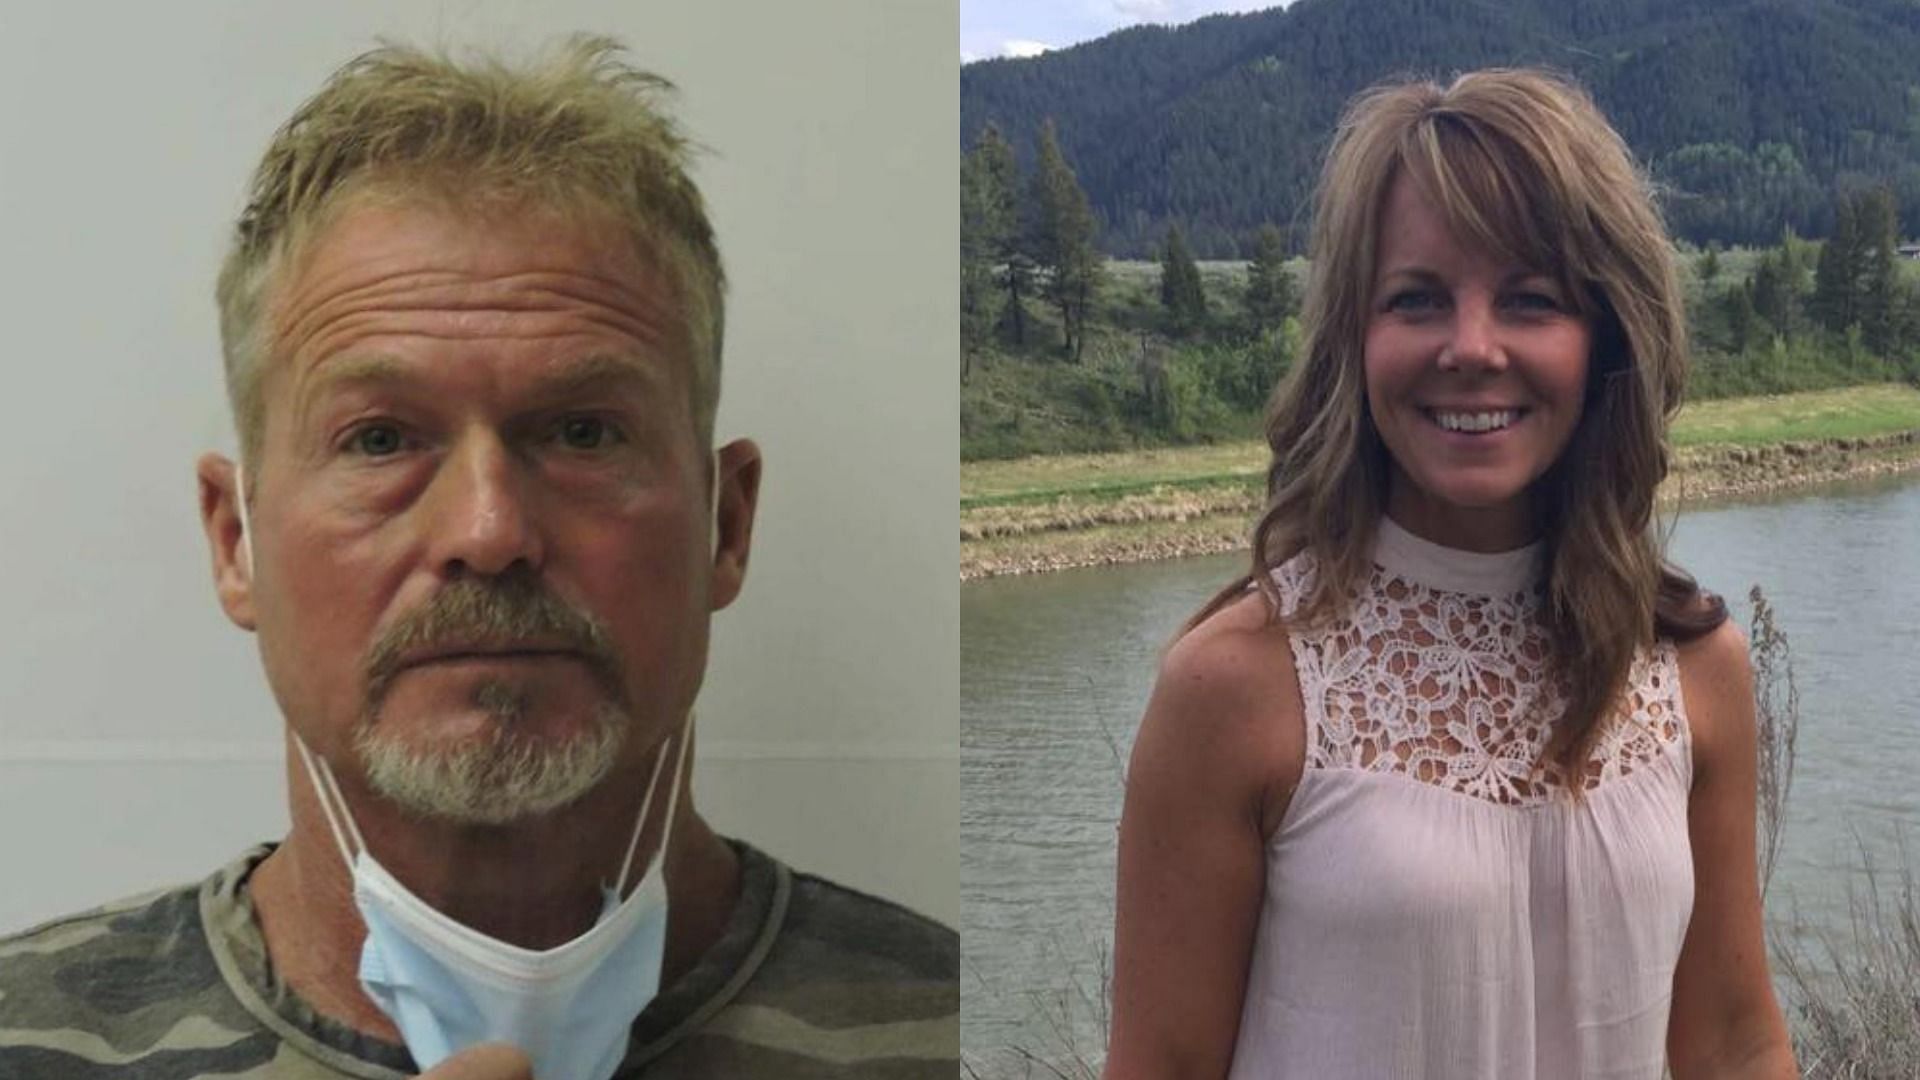 Barry Morphew&#039;s case in connection to his wife Suzzane Morphew&#039;s disappearance and murder was dropped without prejudice (Image via Chaffe County Sheriff&#039;s Office and Carol McKinley/Twitter)